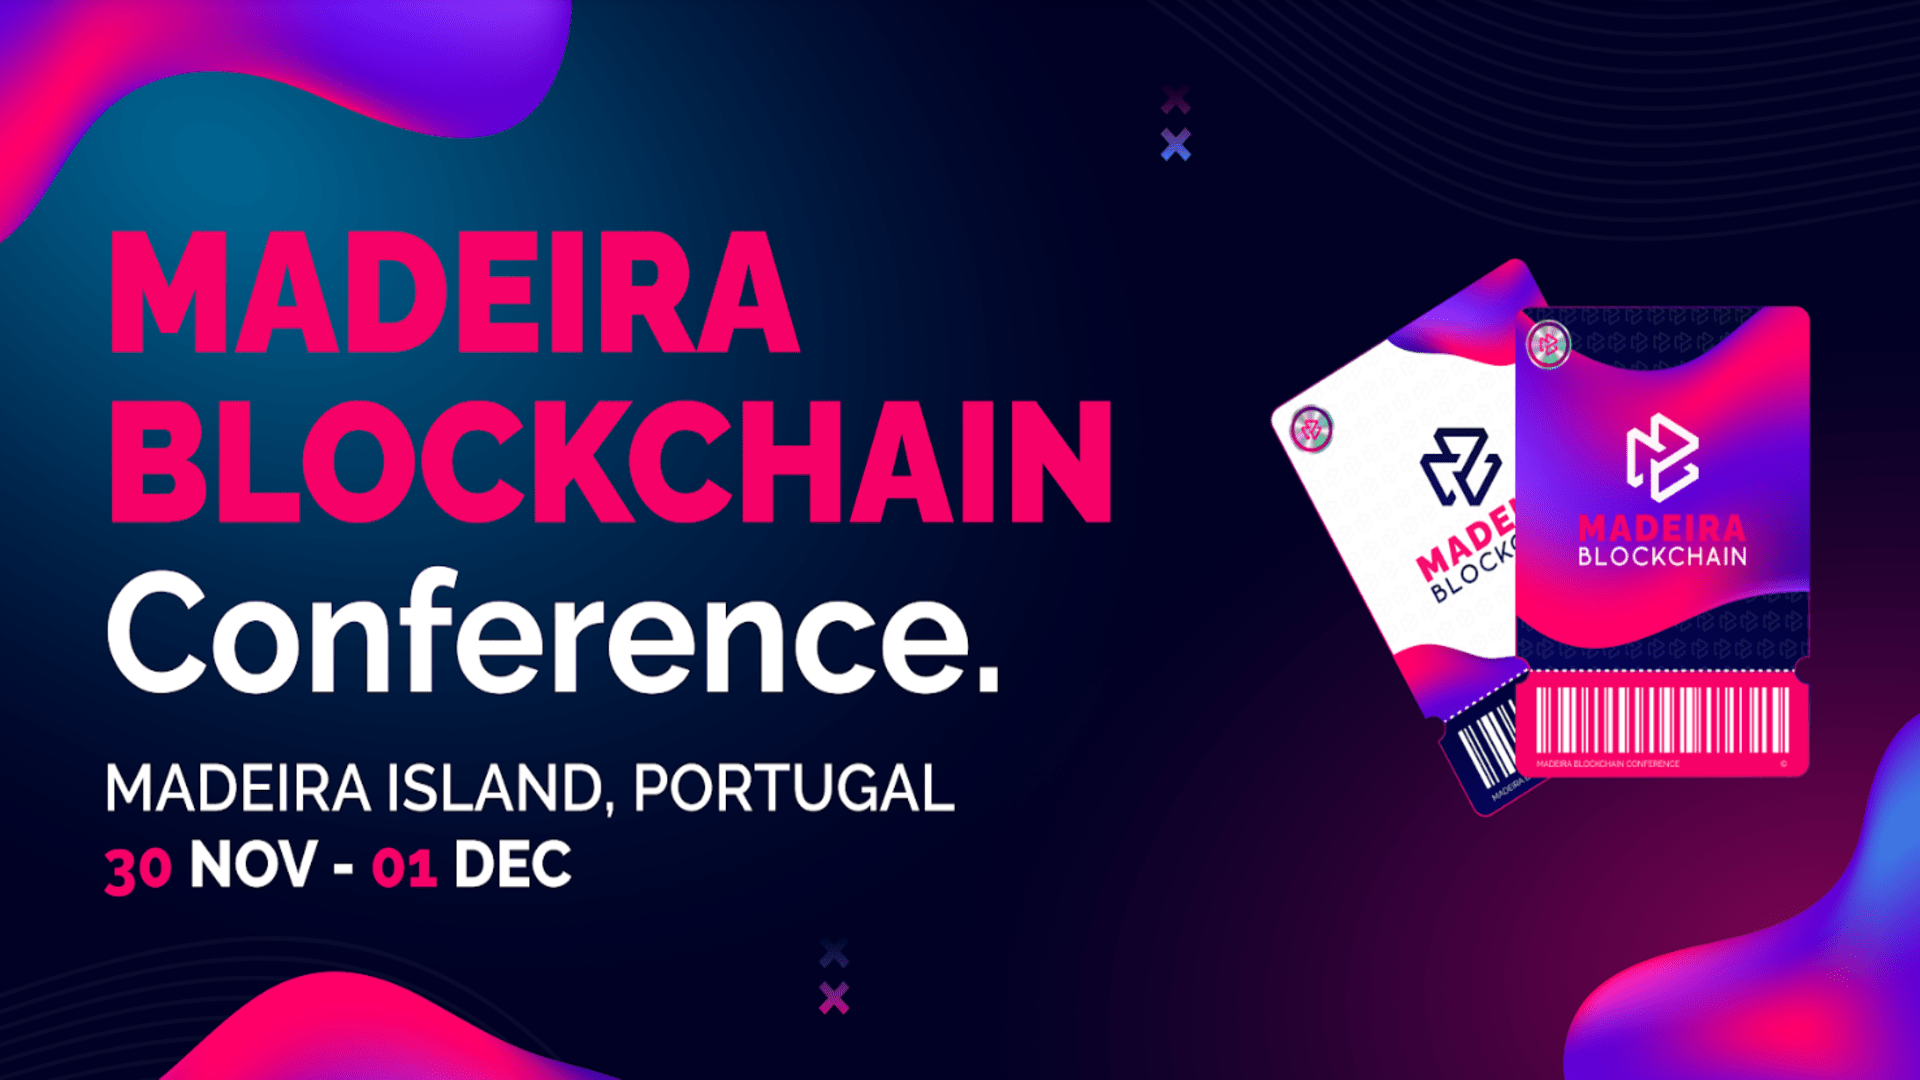 About The Conference Madeira Blockchain Conference